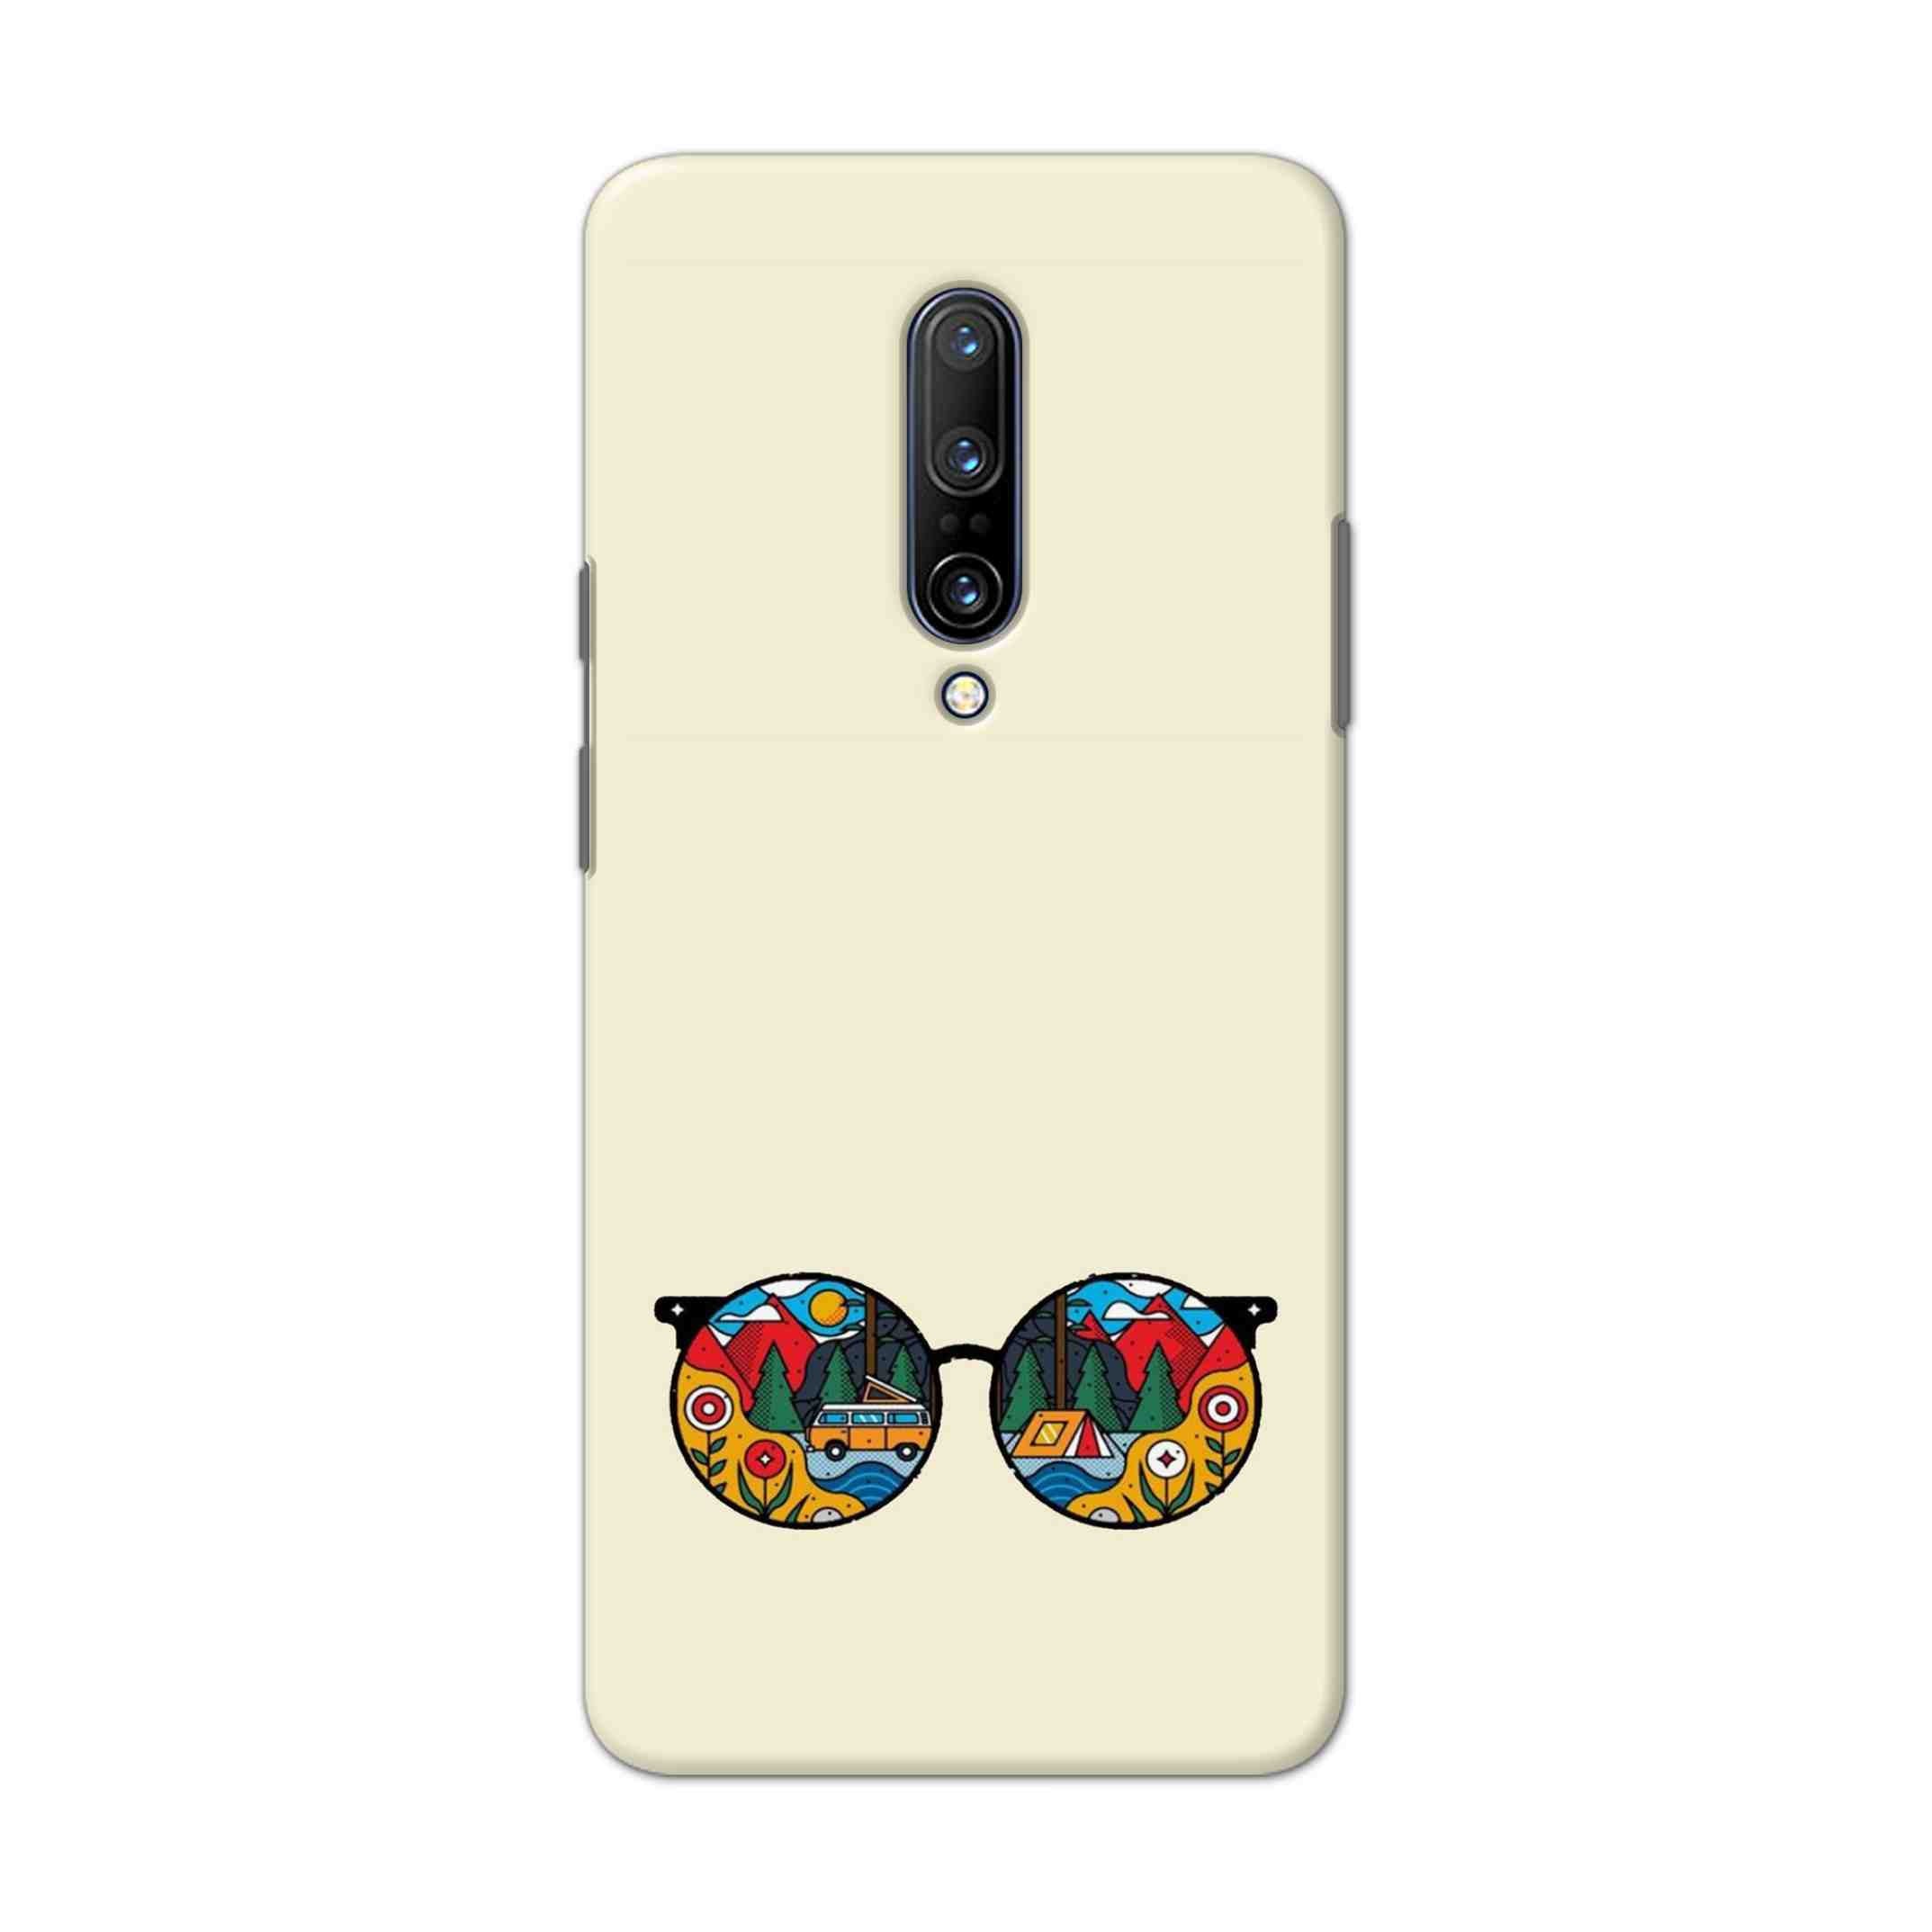 Buy Rainbow Sunglasses Hard Back Mobile Phone Case Cover For OnePlus 7 Pro Online